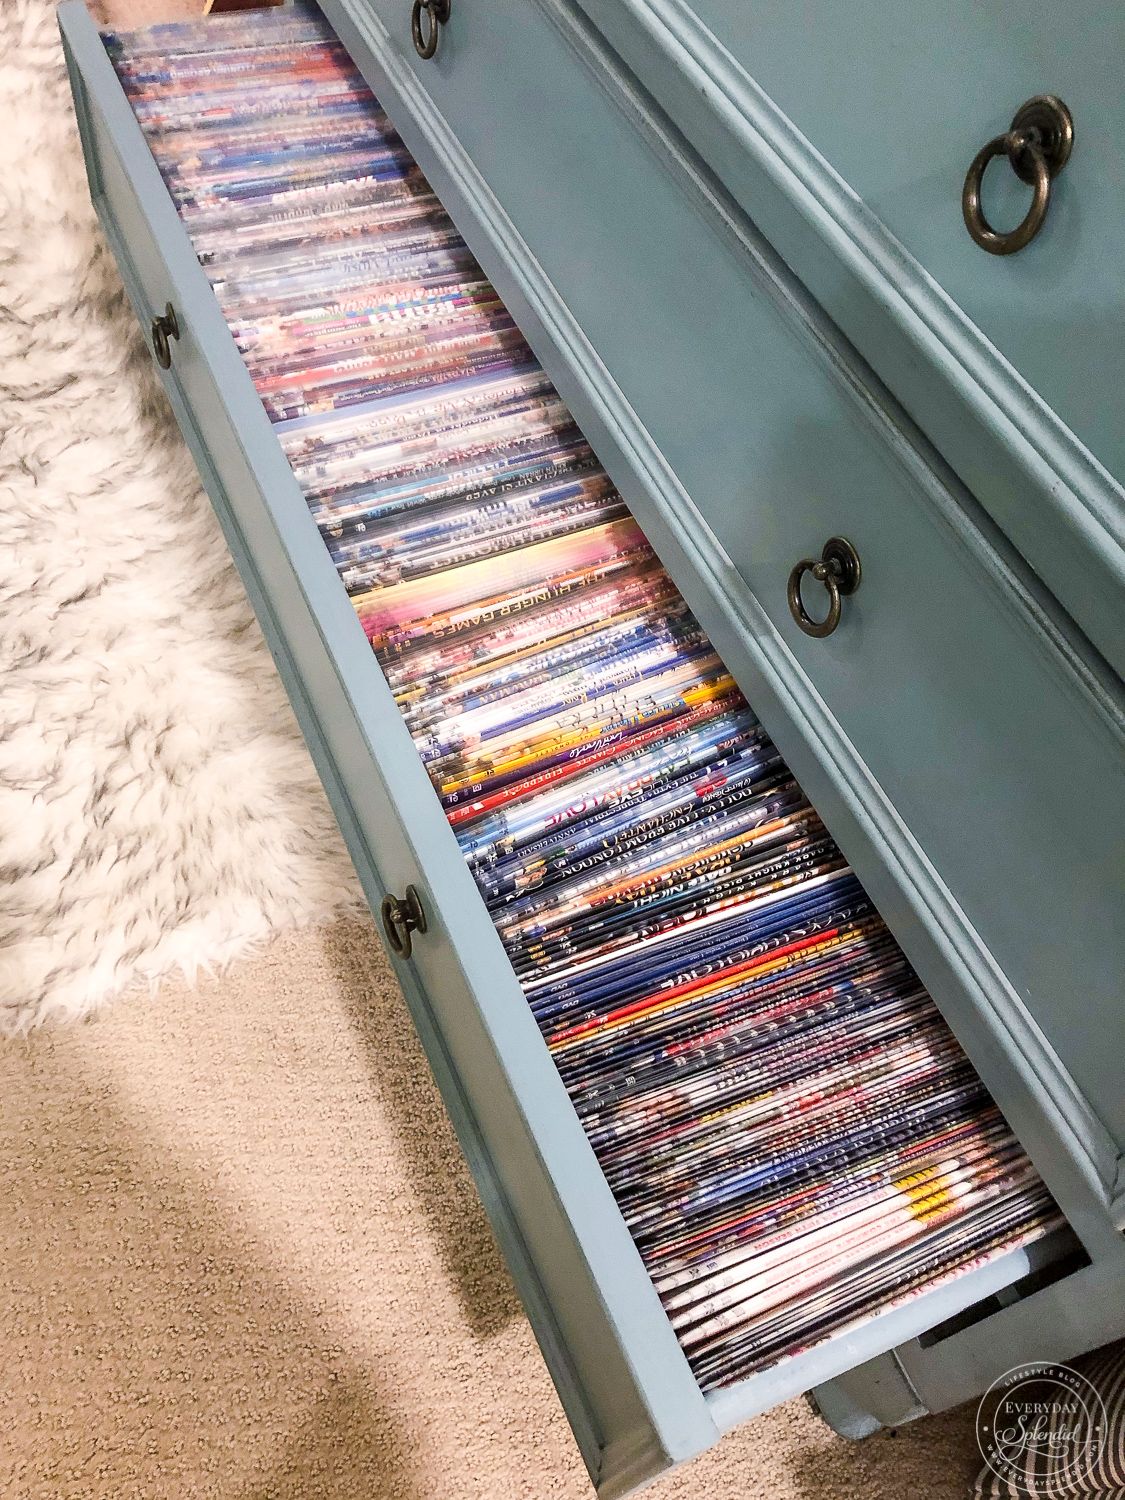 Keeping your DVD safe with great DVD storage